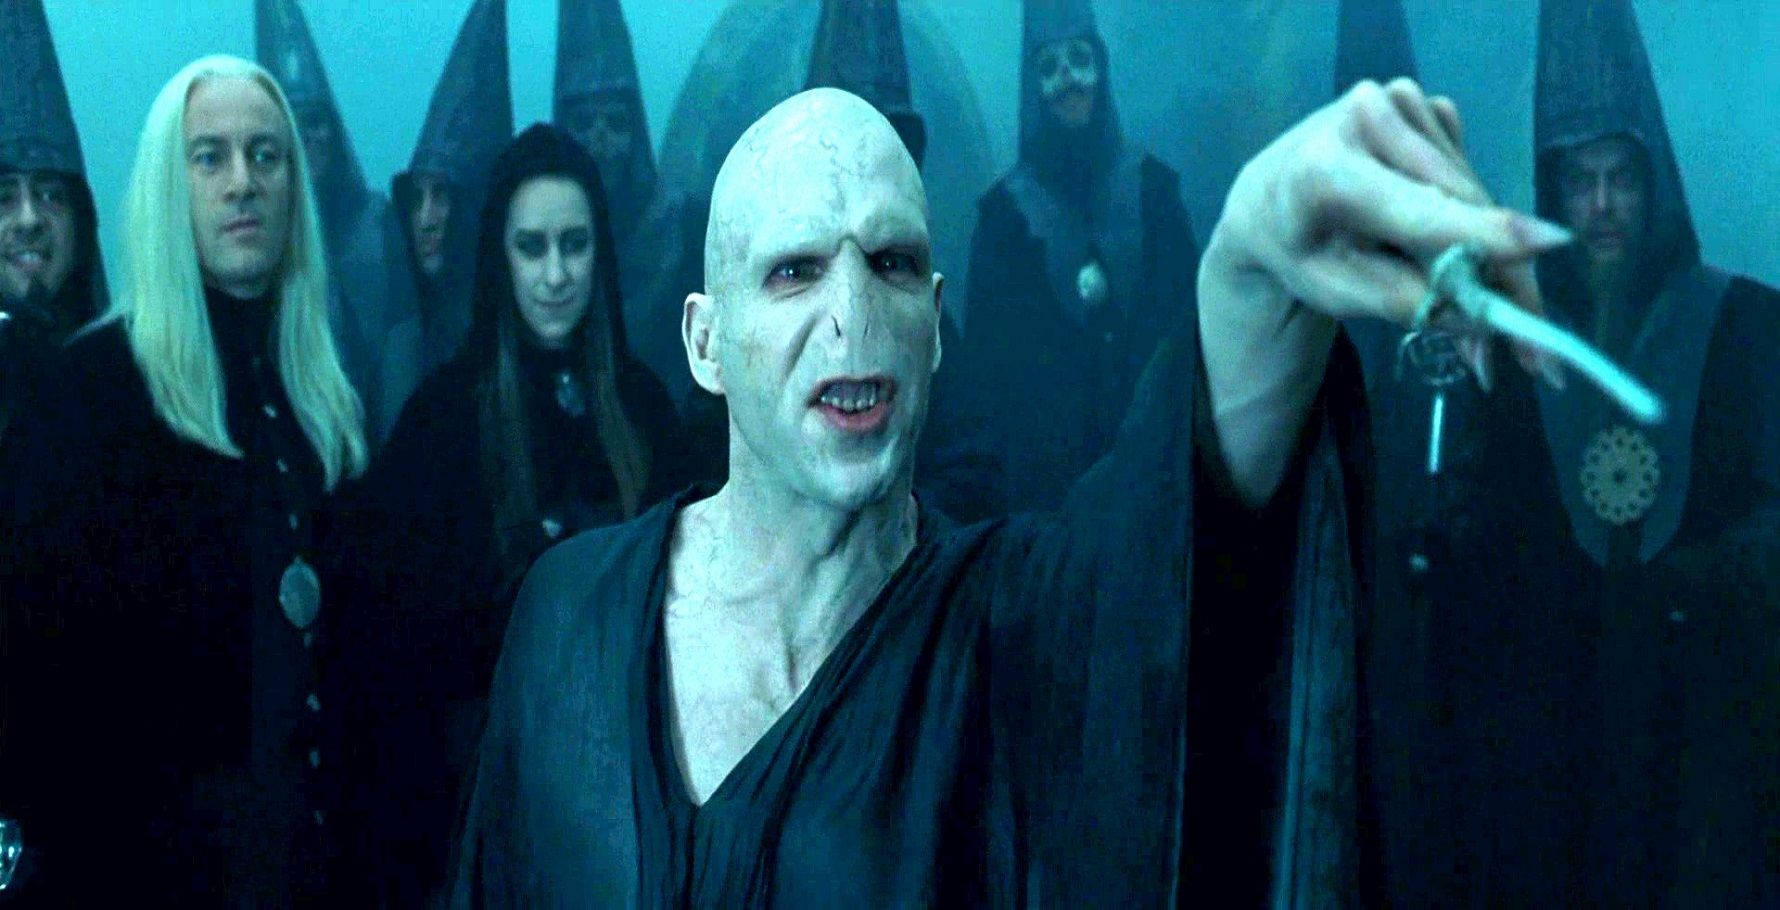 Harry Potter: 9 Worst Things Voldemort Did In The movies (And One Good)